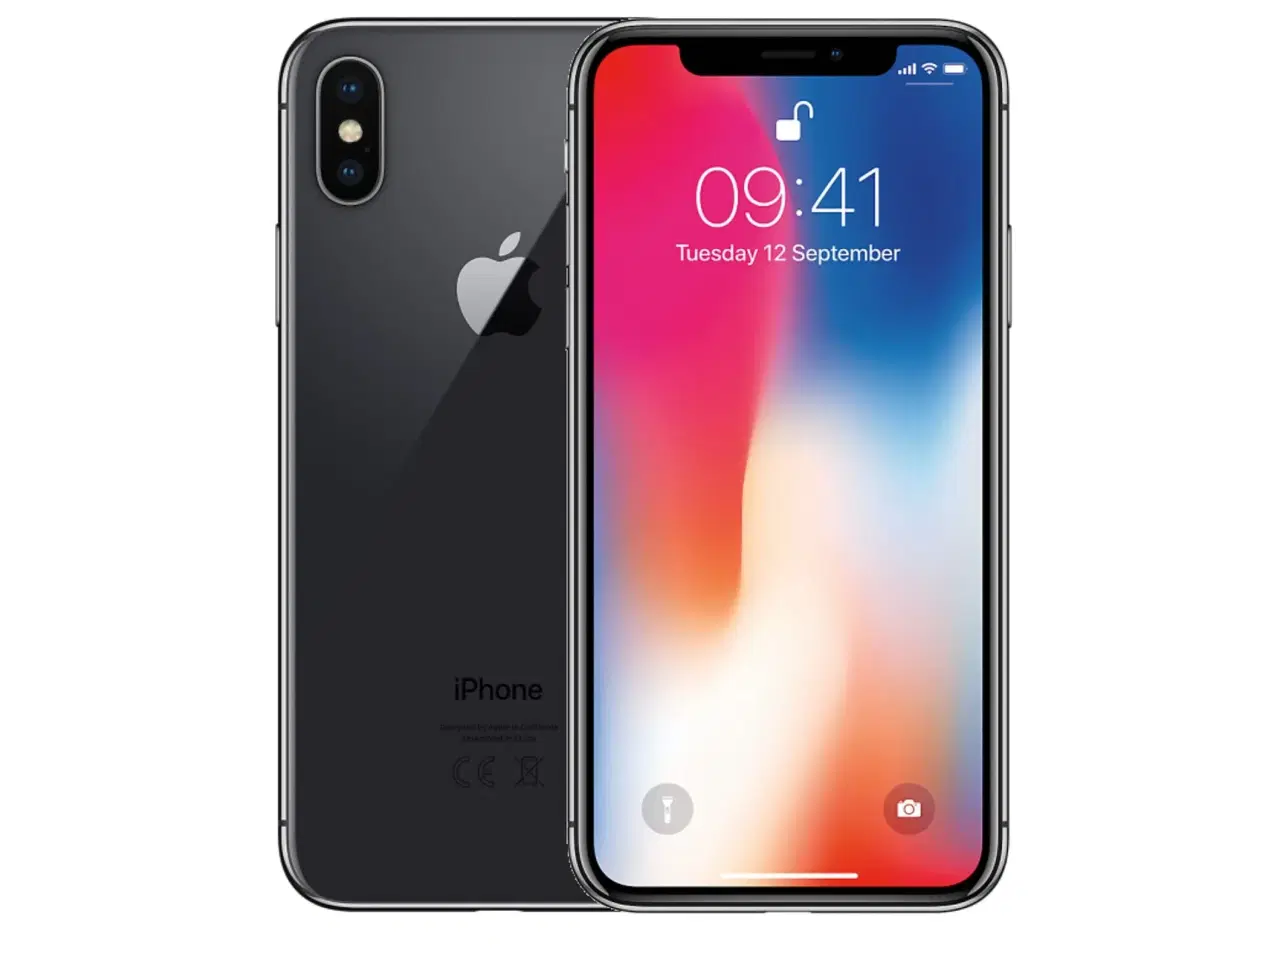 Billede 1 - NY iPhone X, Space Grey, 64 gb + Covers + Dock